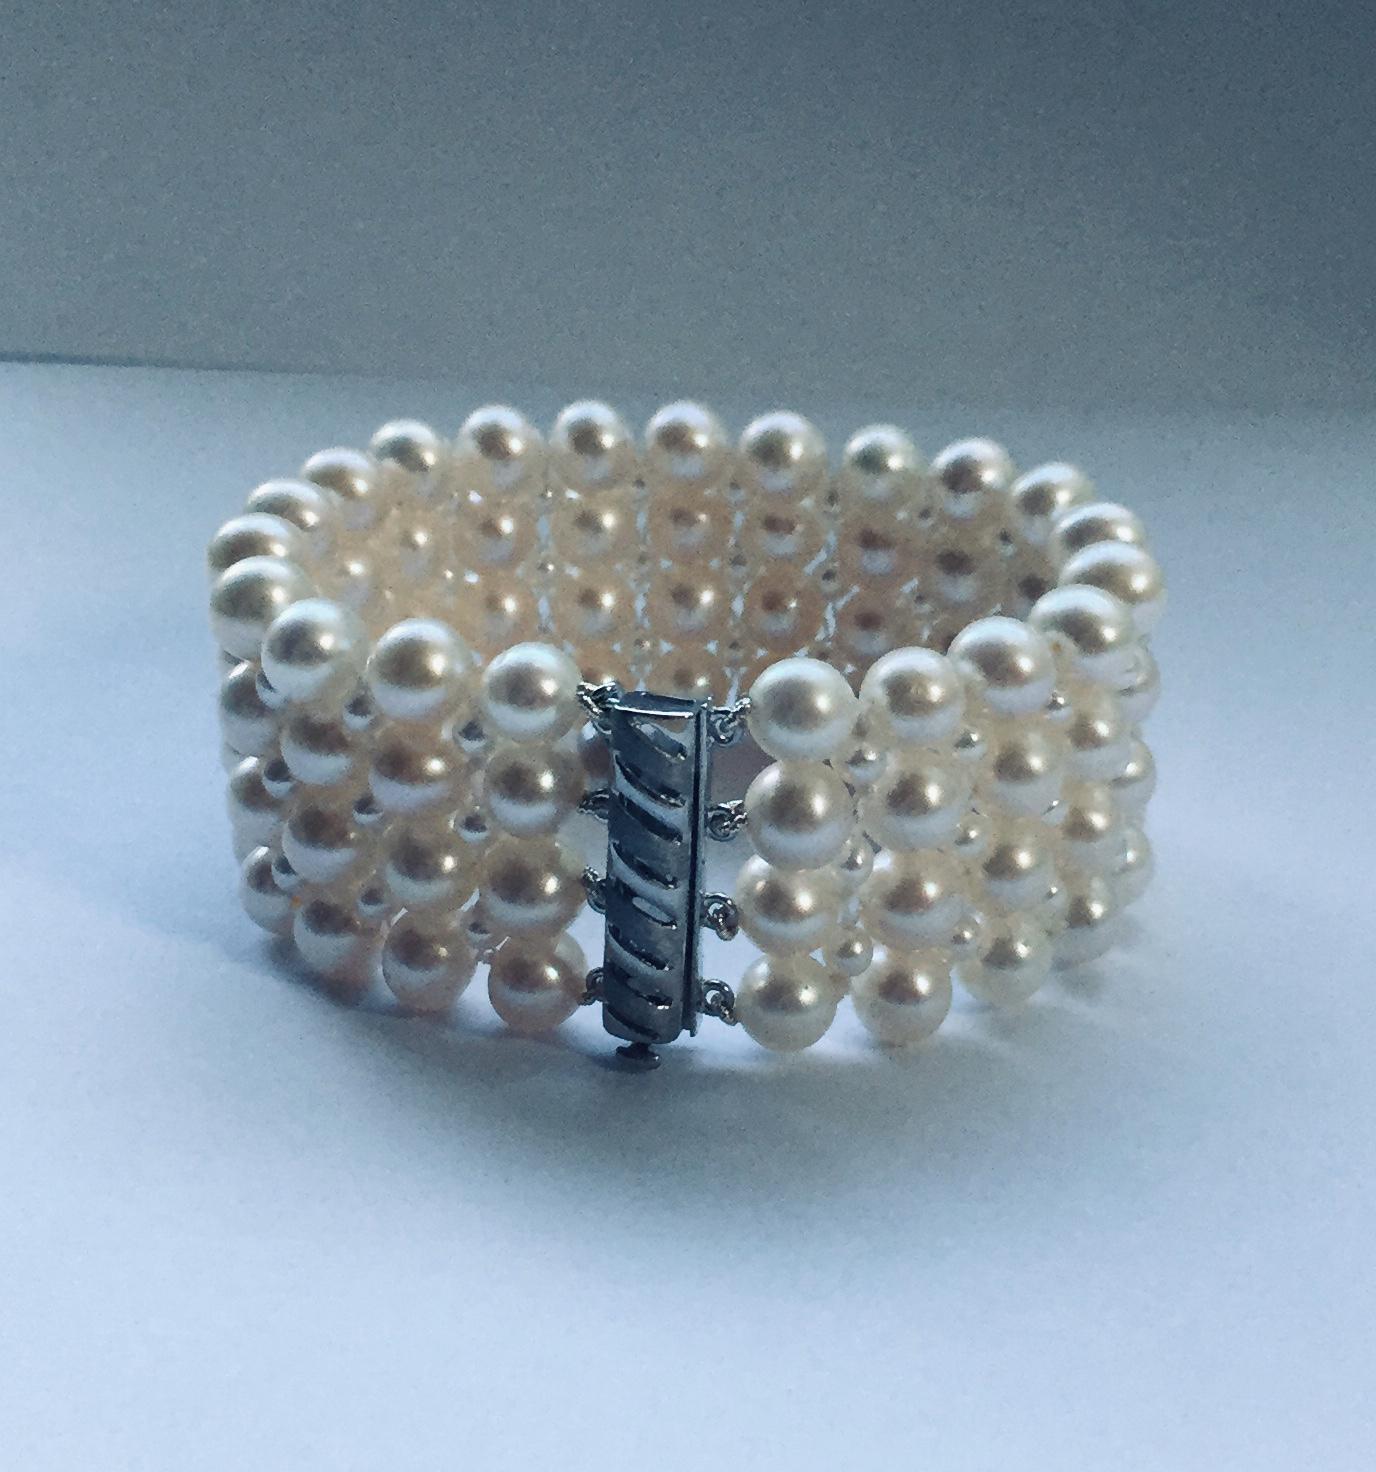 Marina J. Hand-Woven Pearl Bracelet with 14 Karat White Gold Plated Clasp 5